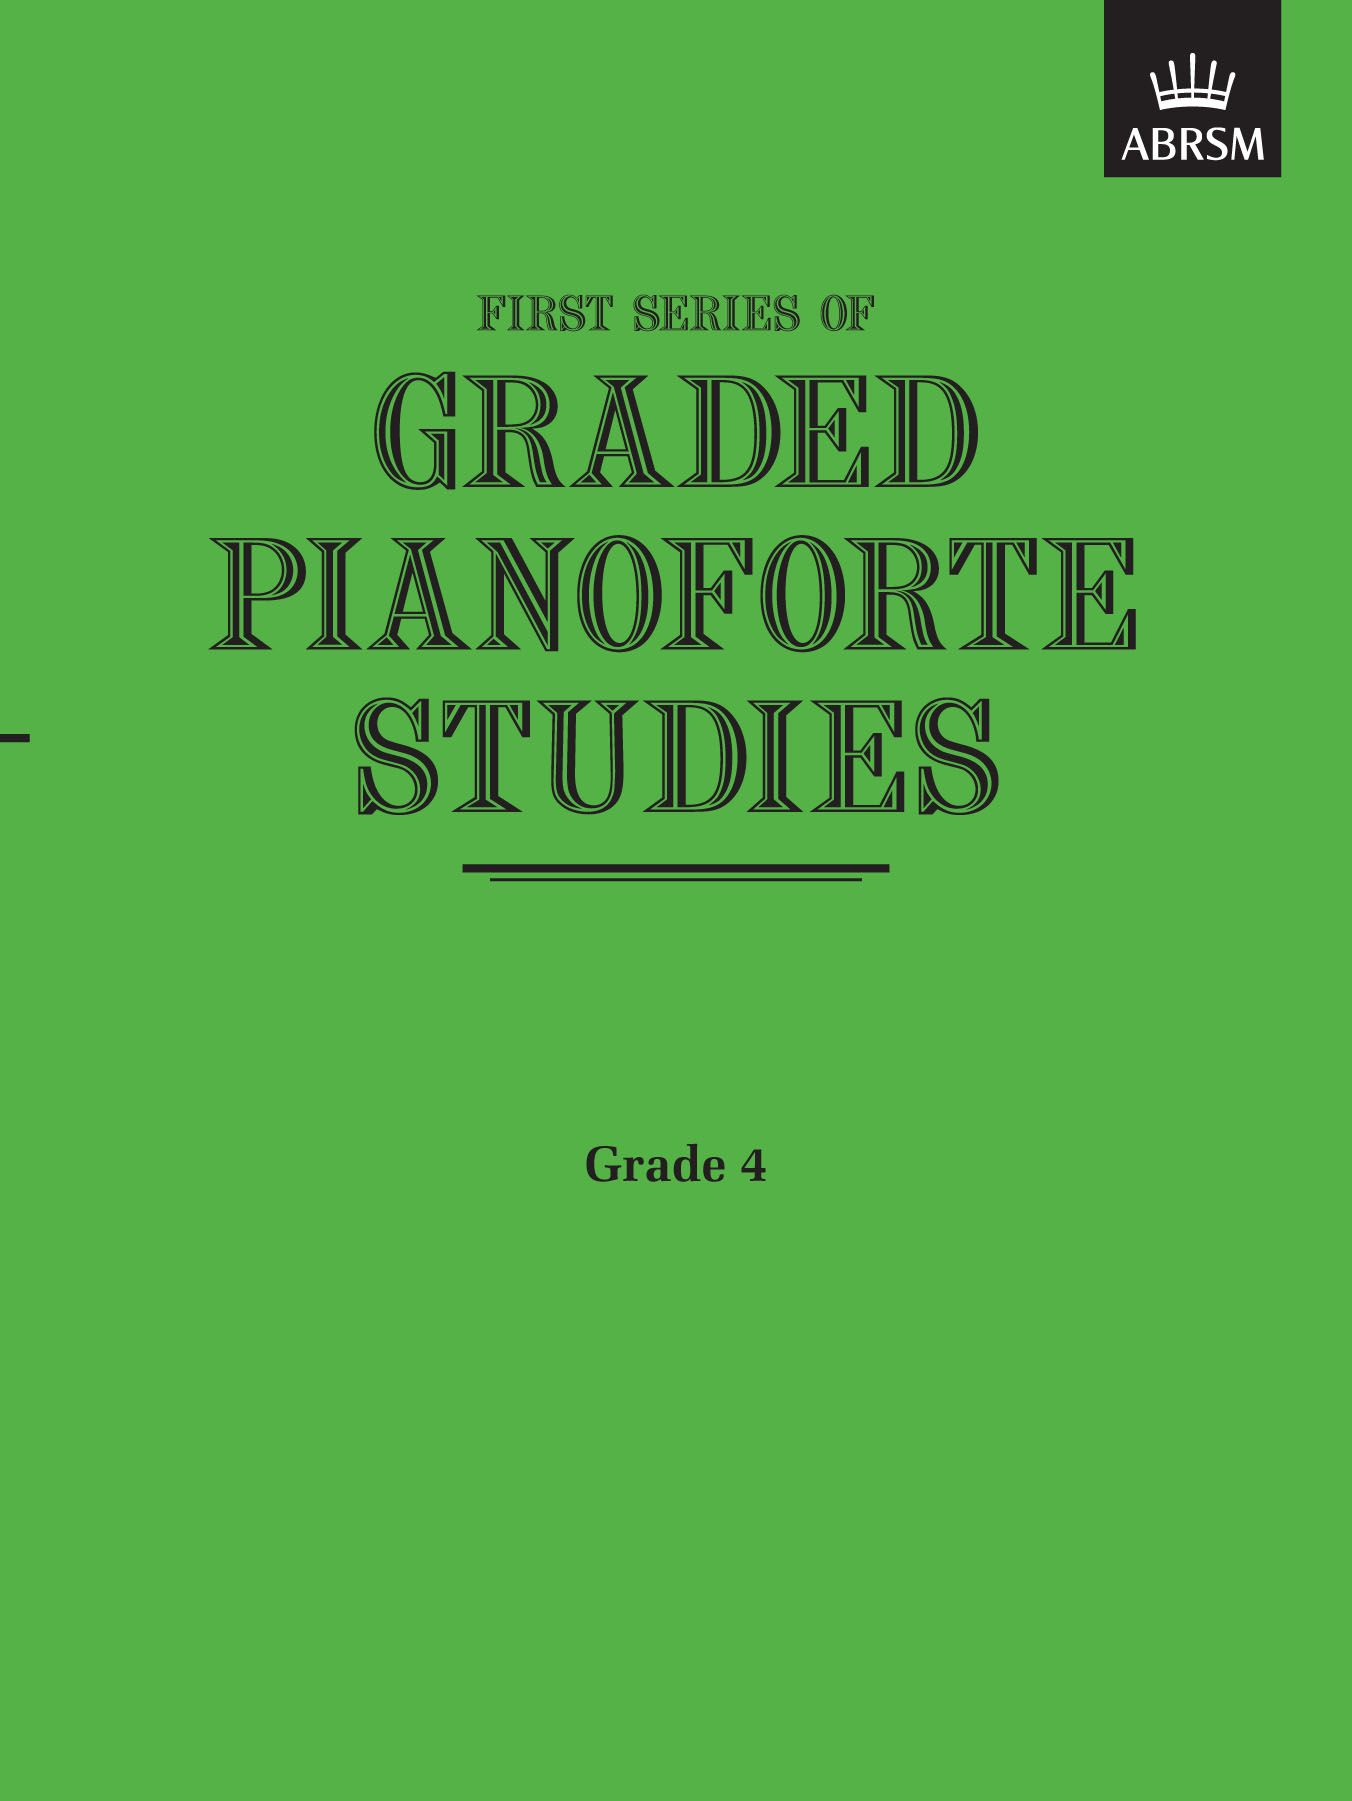 First Series of Graded Pianoforte Studies G4